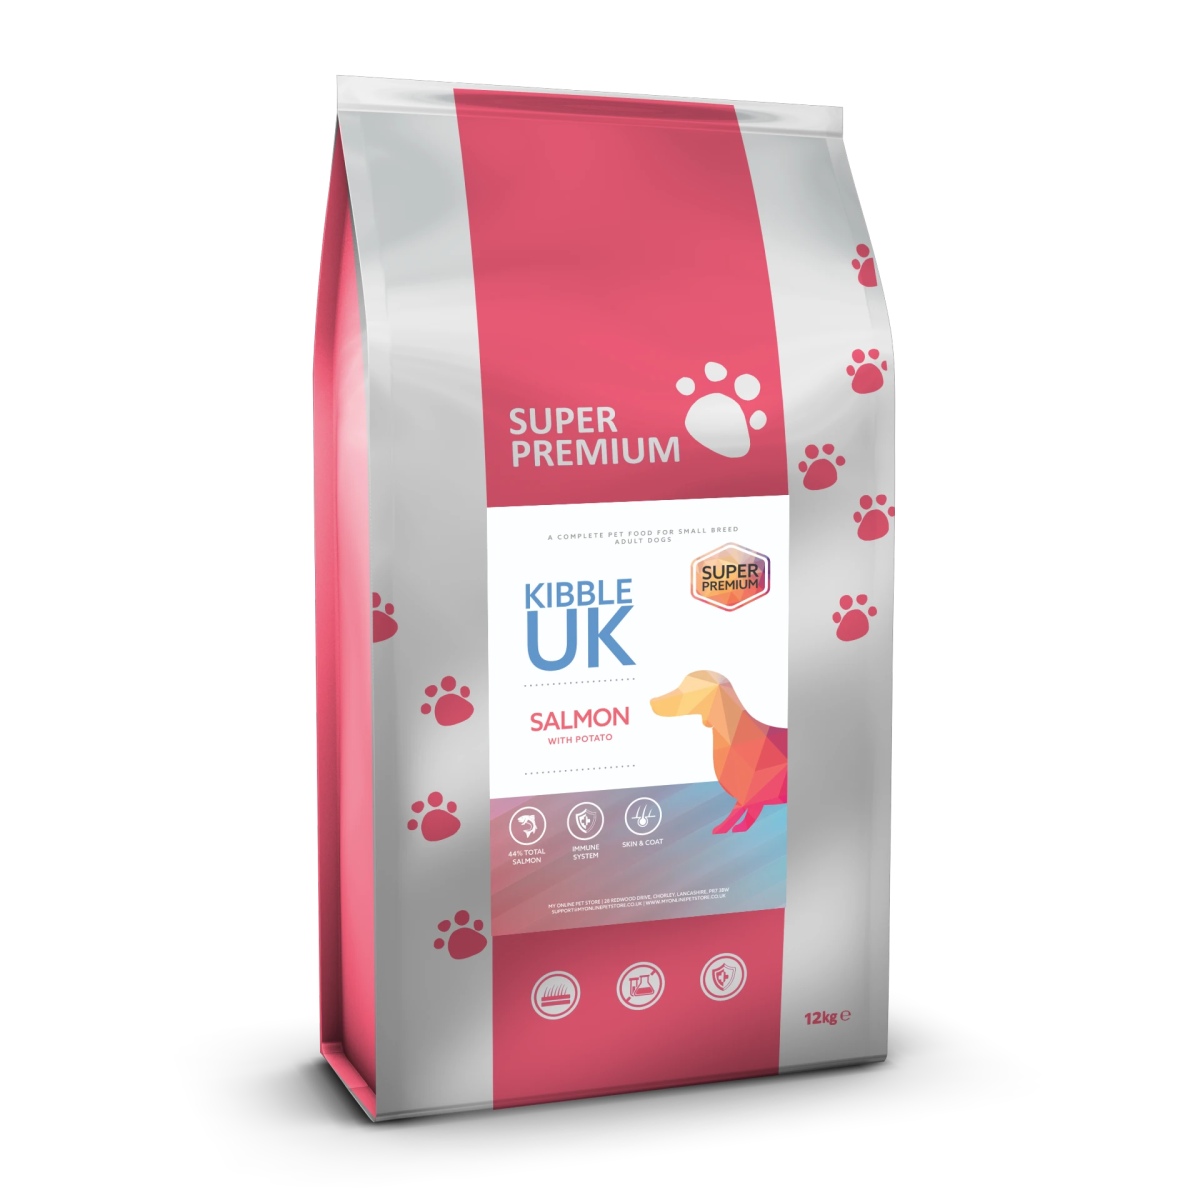 Super Premium Small Breed Dog Food - Salmon with Potato - Kibble UK - My Online Pet Store